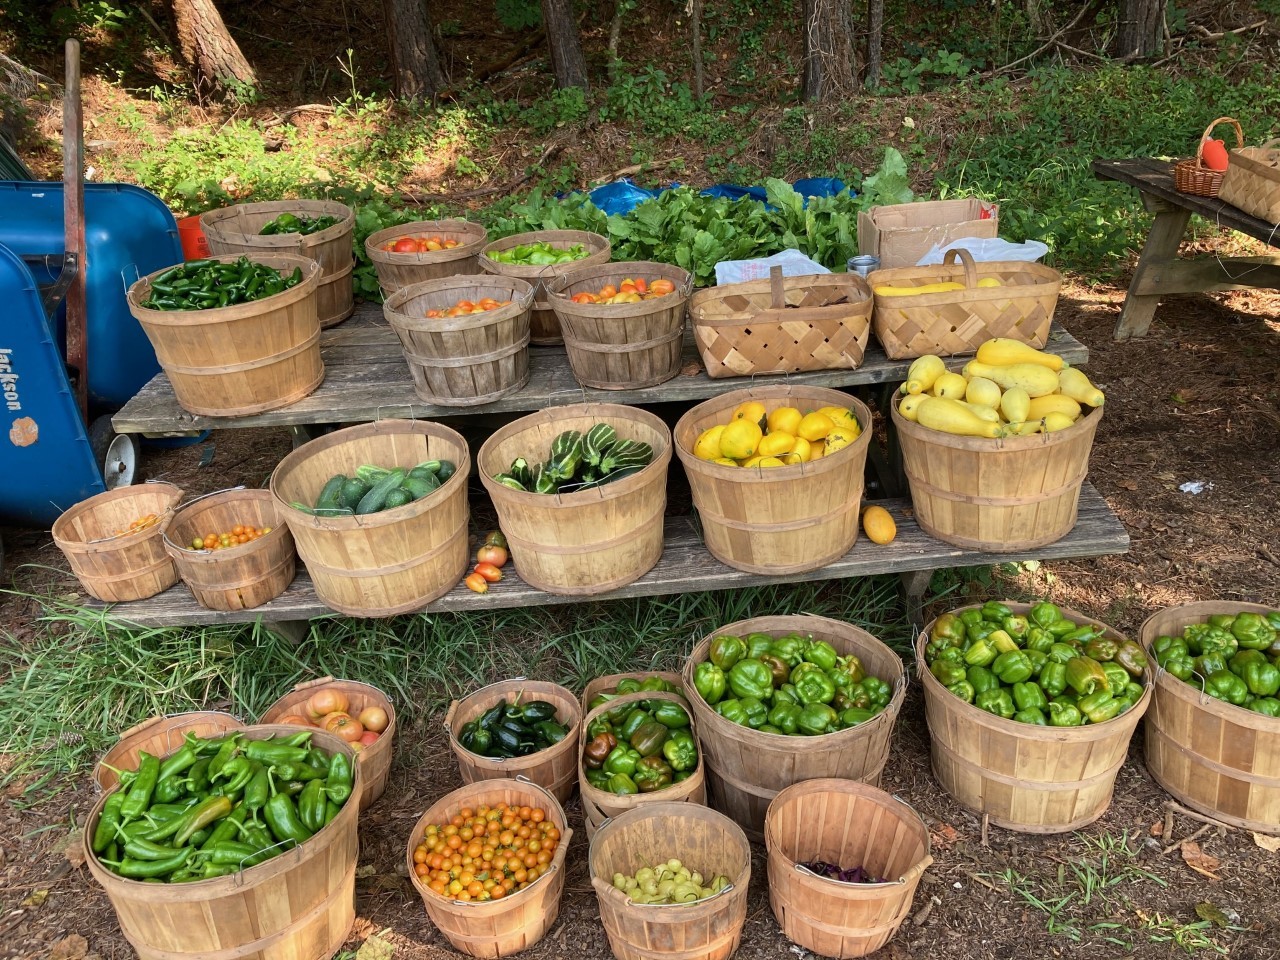 Vegetables picked and lined up in baskets